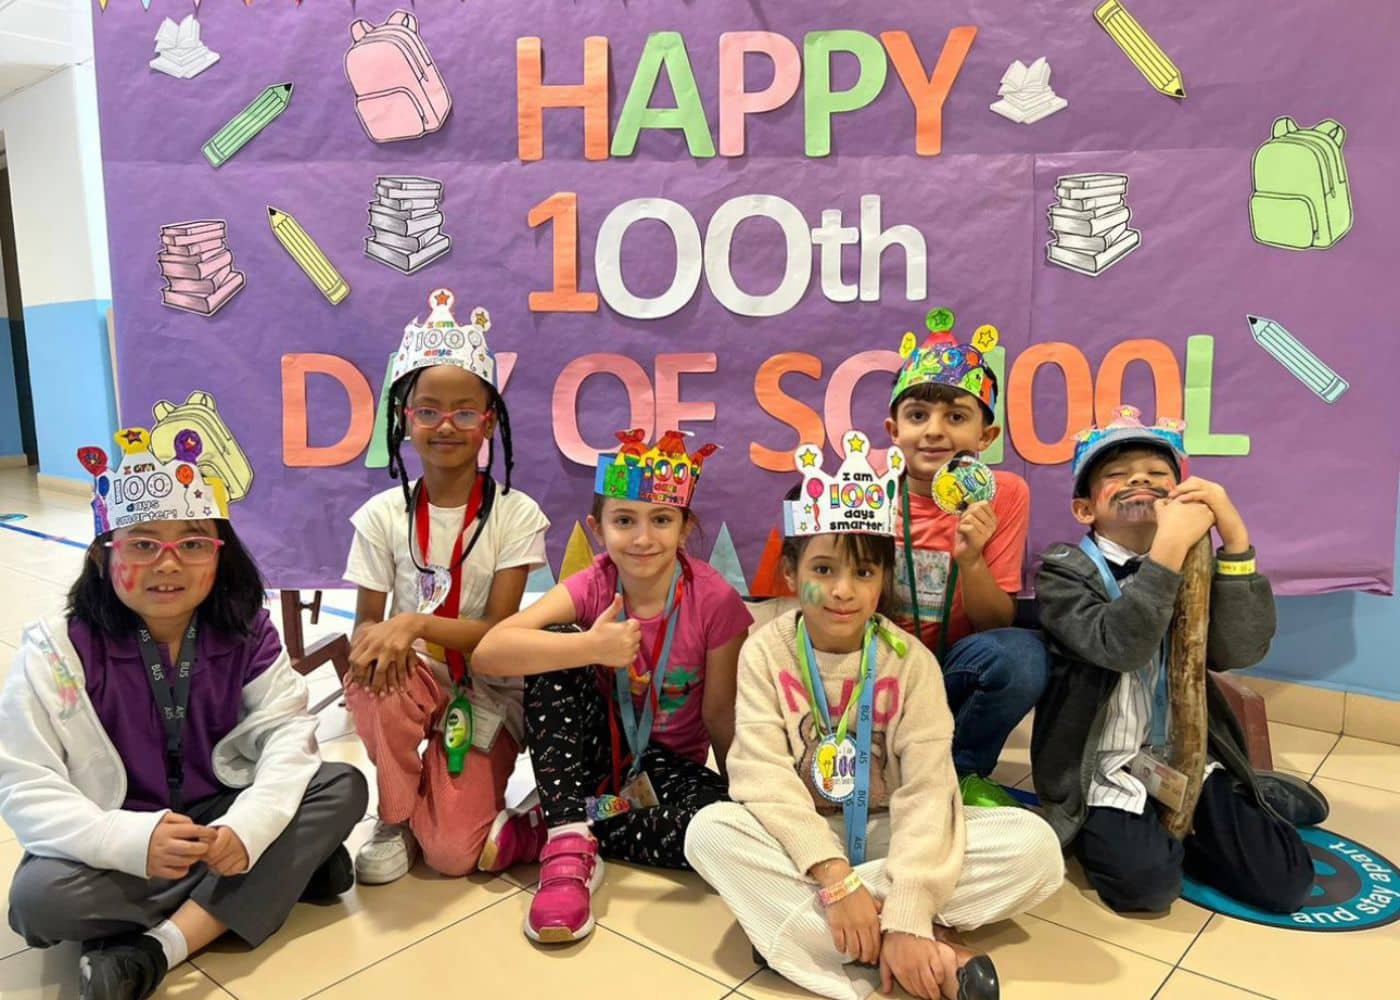 Students of Abu Dhabi International School at the 100 Days of School event